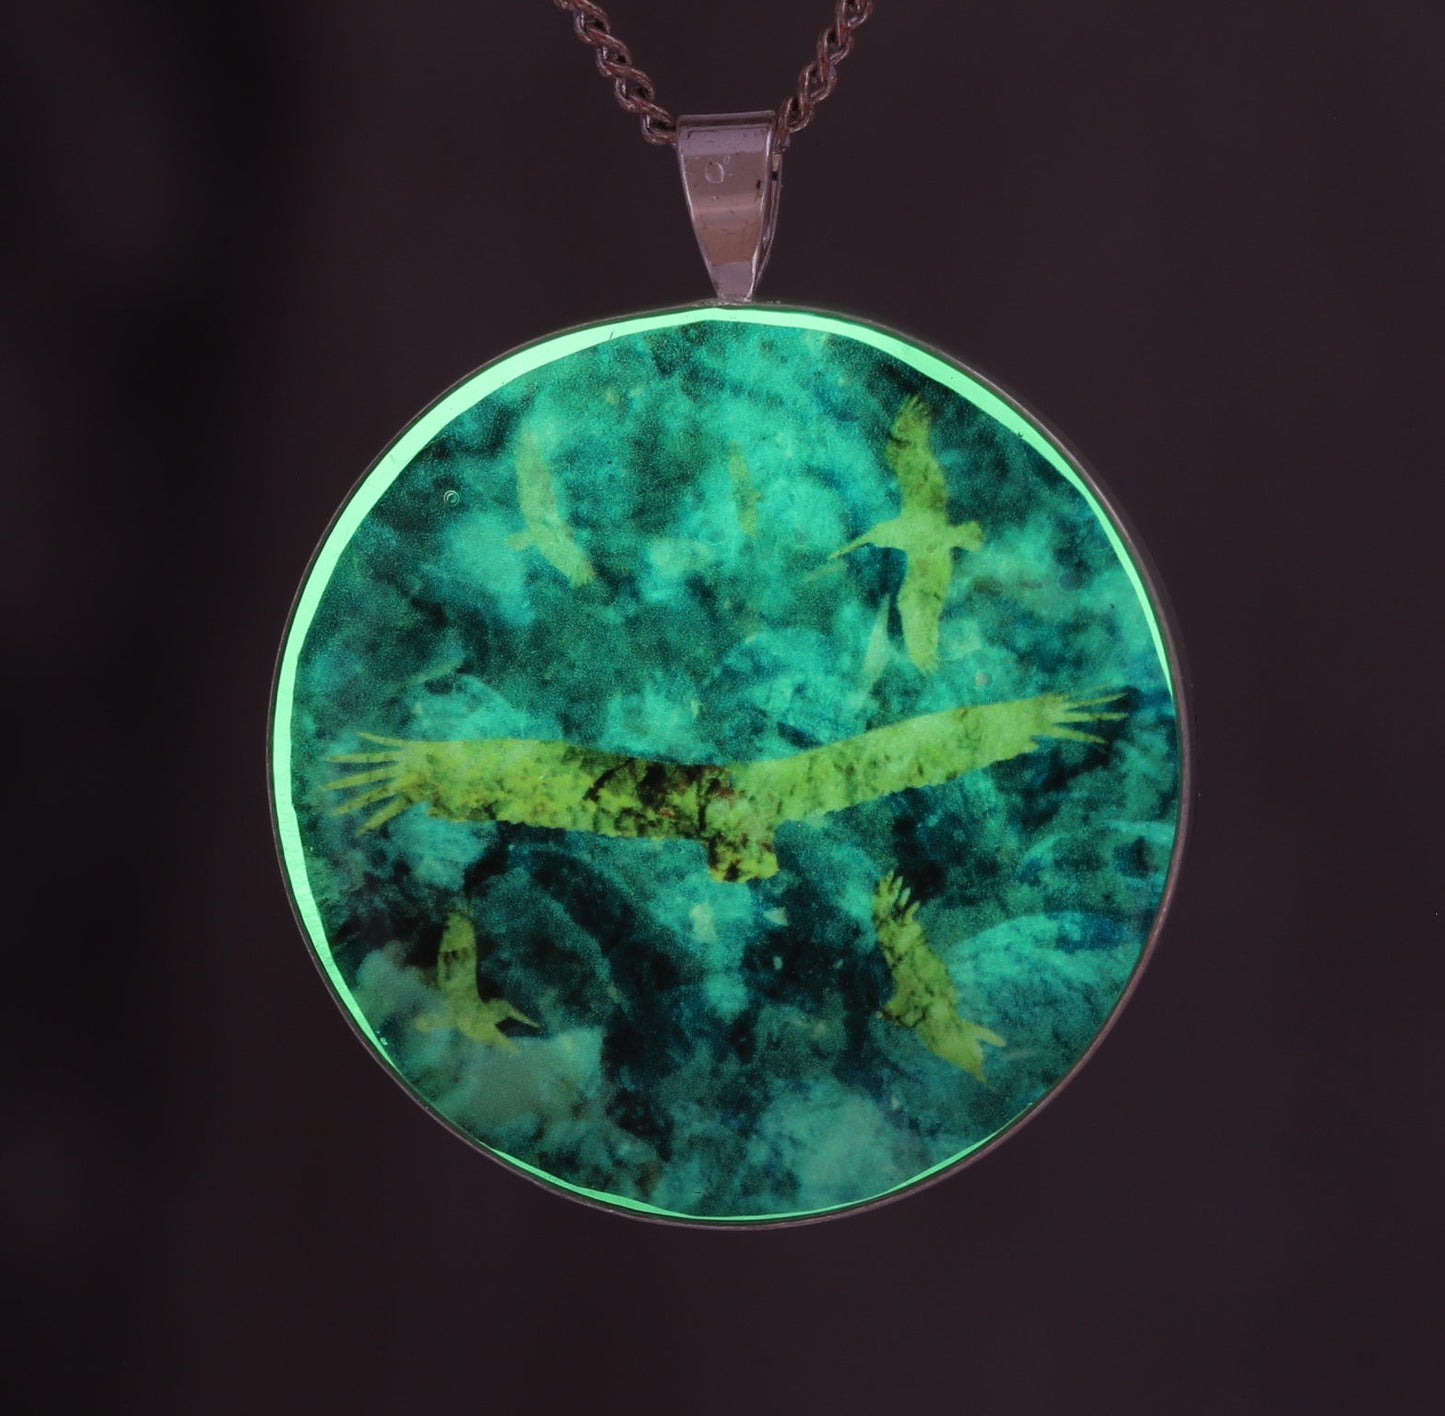 Flying by the Seaside  - Glow-in-the-dark pendant with a beautiful abstract bird pattern